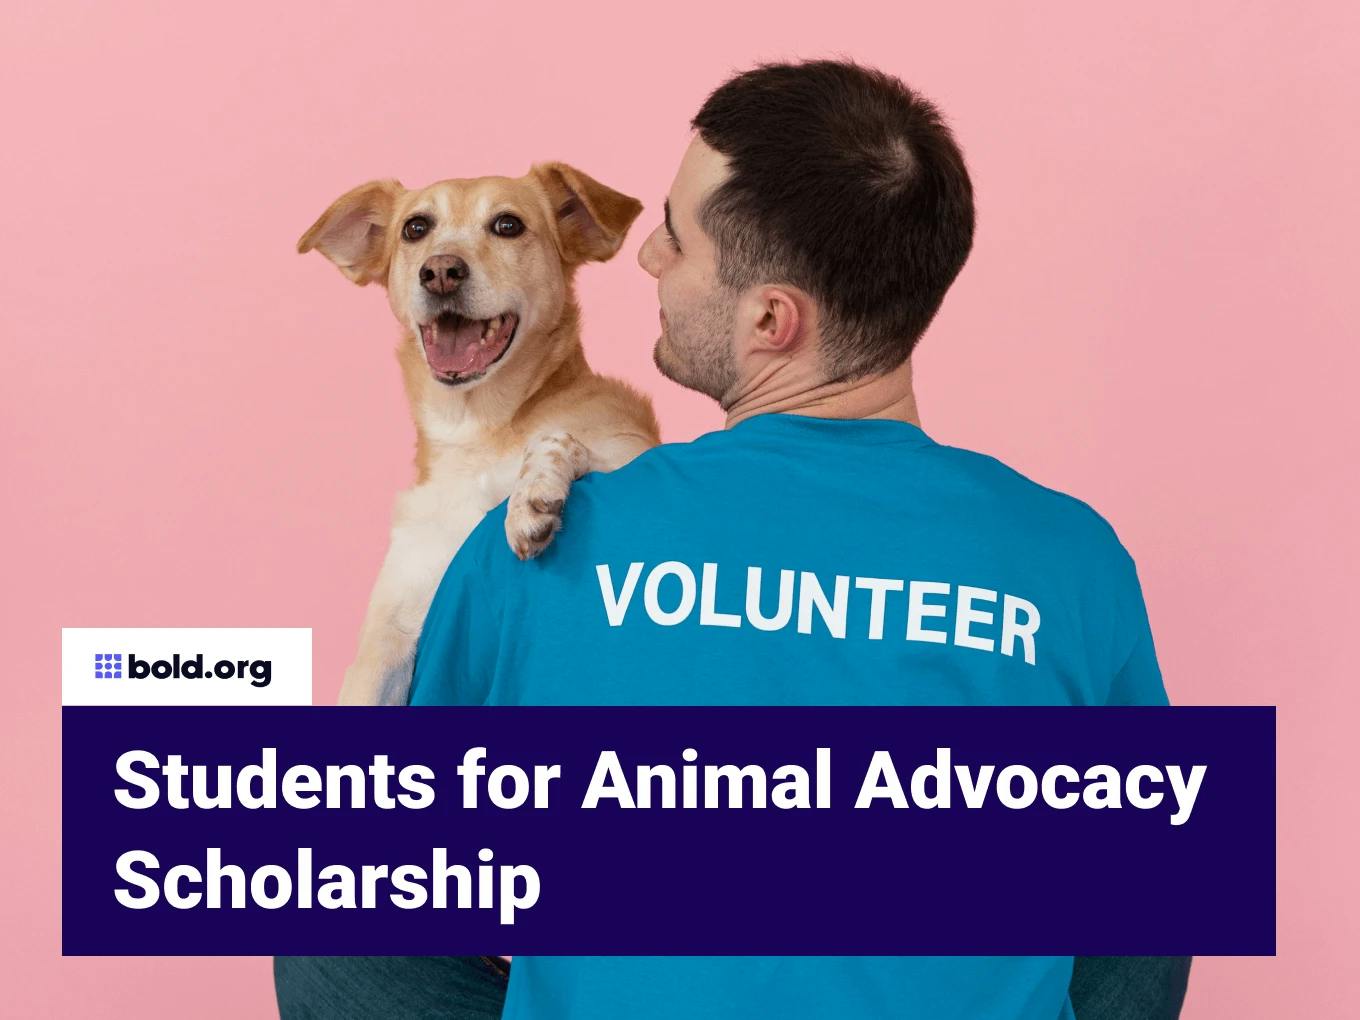 Students for Animal Advocacy Scholarship